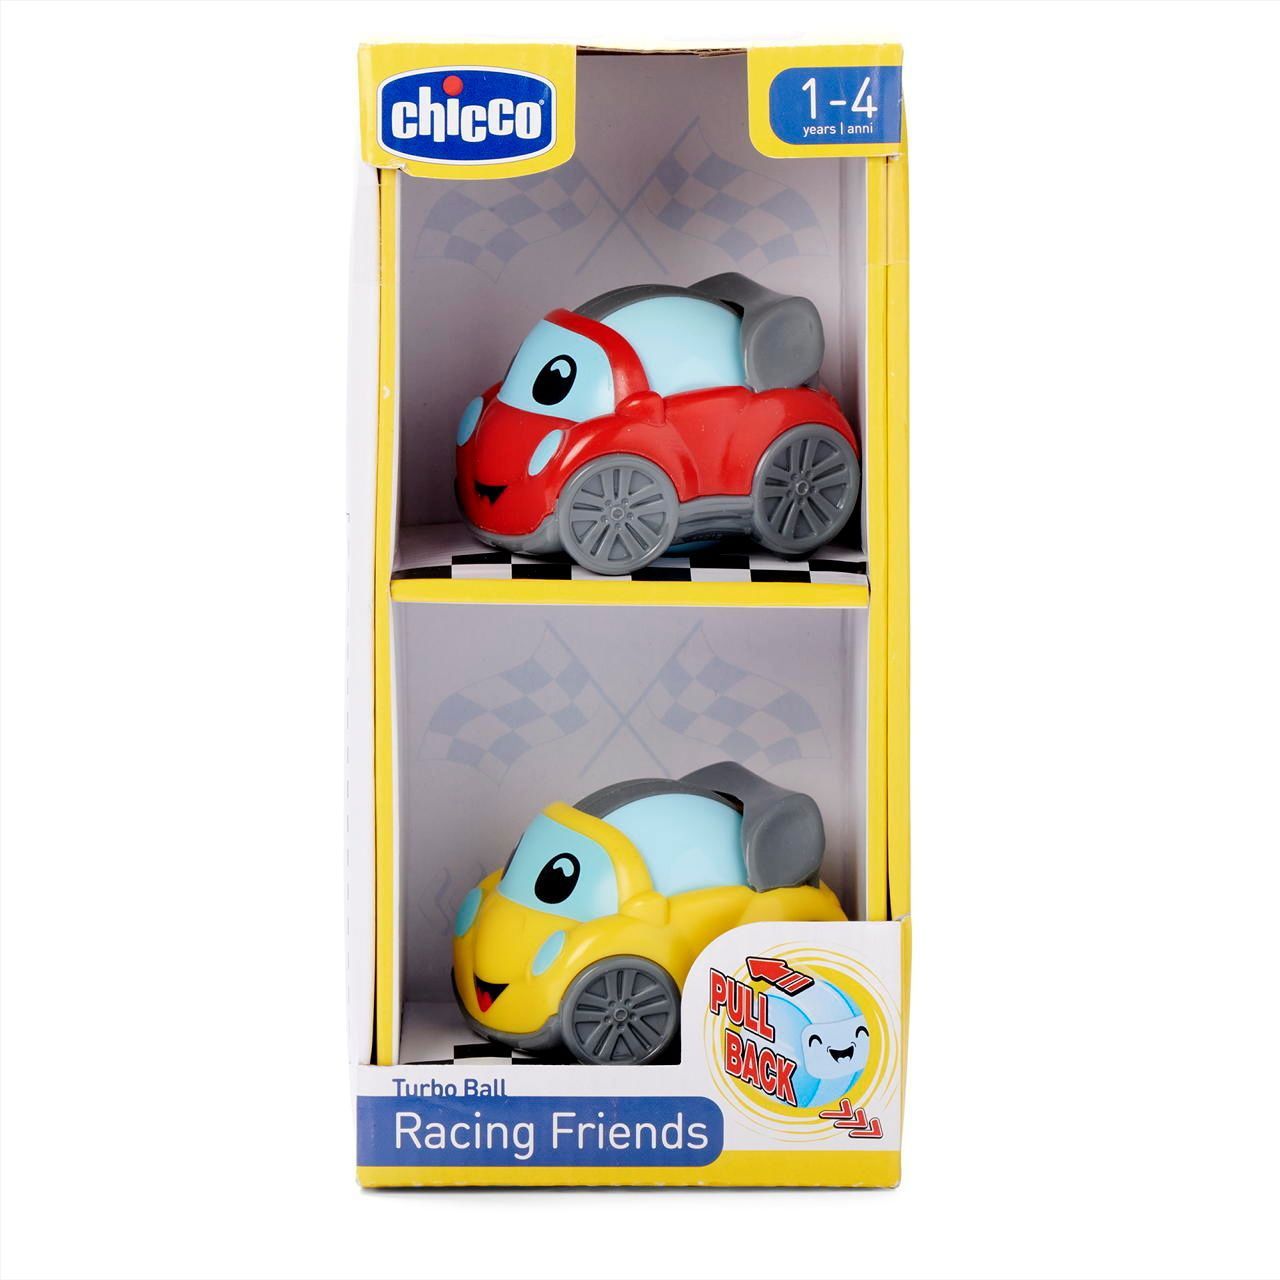 Racing Friends Chicco image number 7